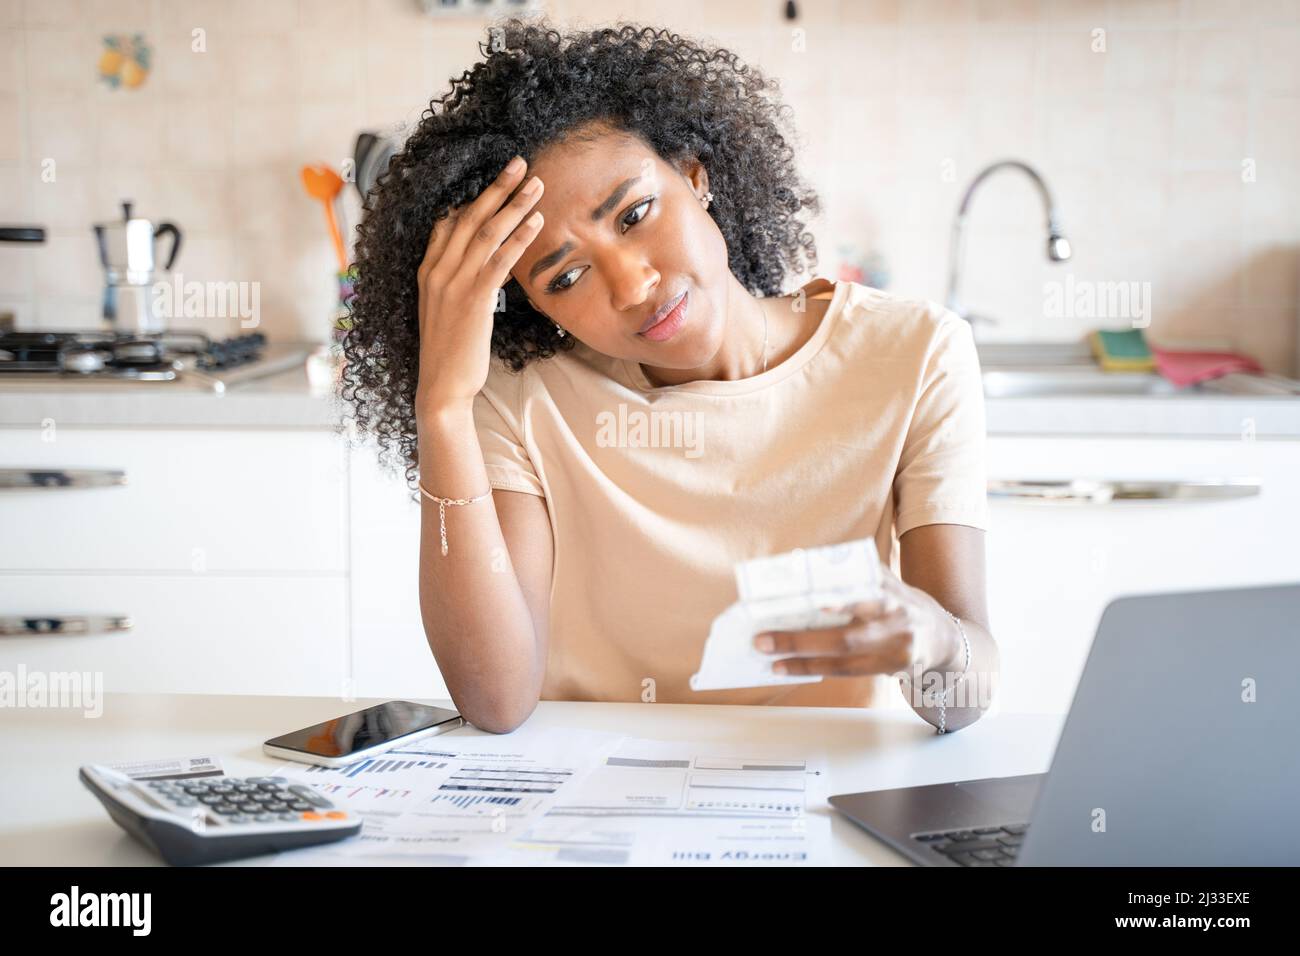 One black woman worried about home expenses Stock Photo